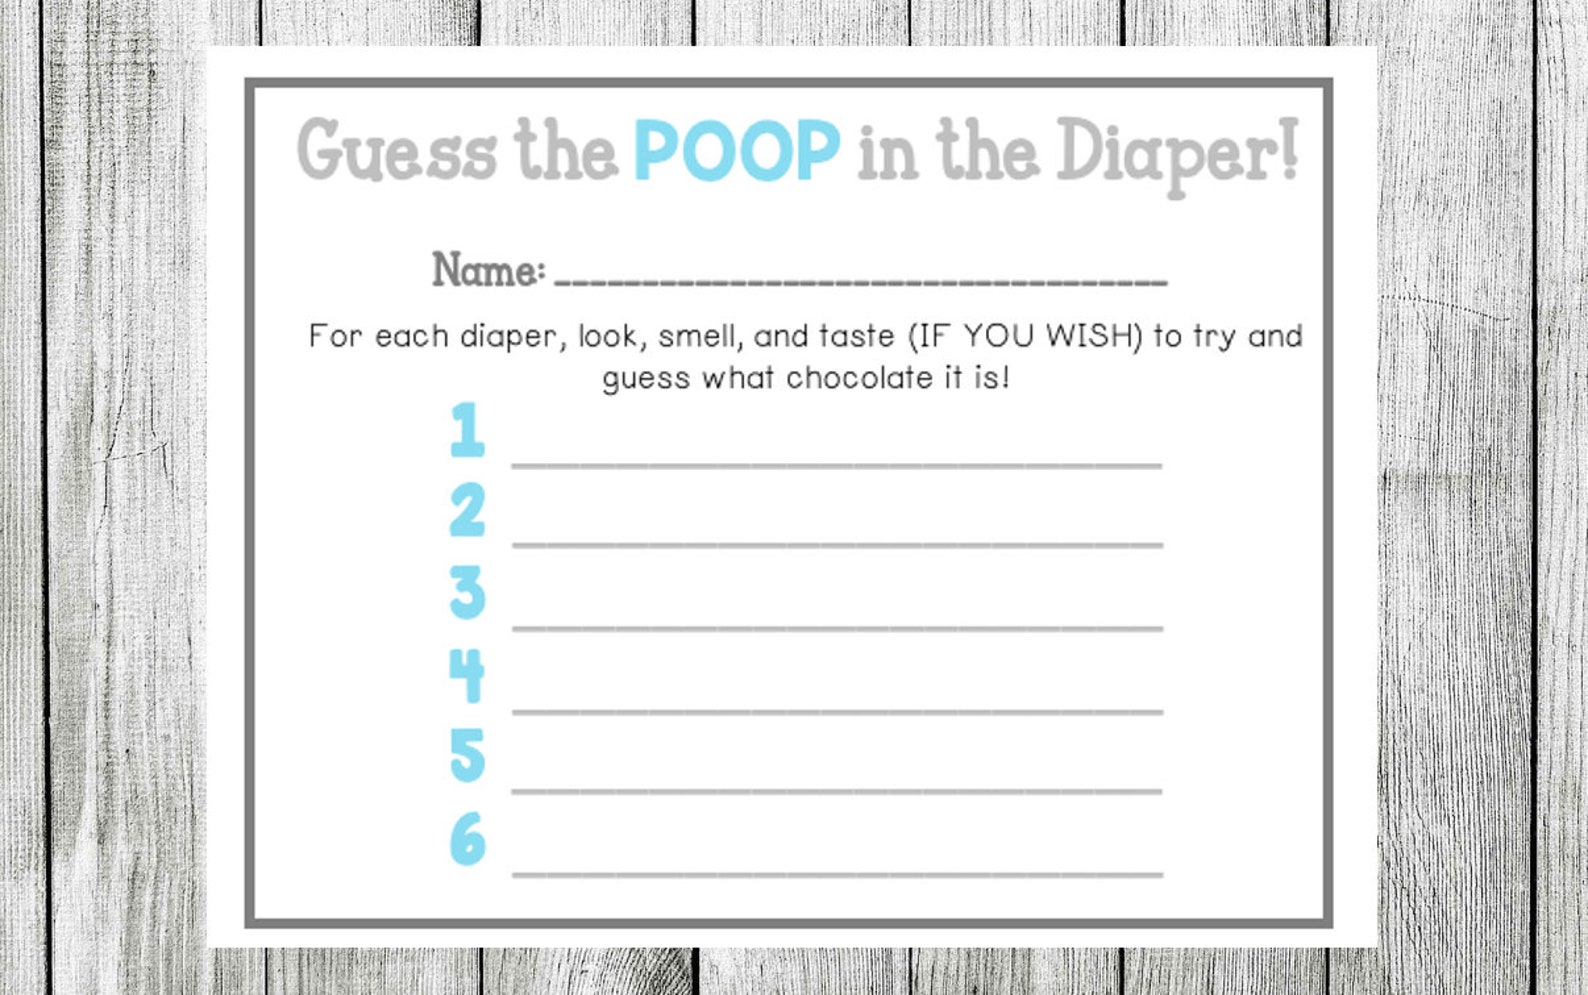 guess-the-chocolate-in-the-poopy-diaper-baby-shower-game-etsy